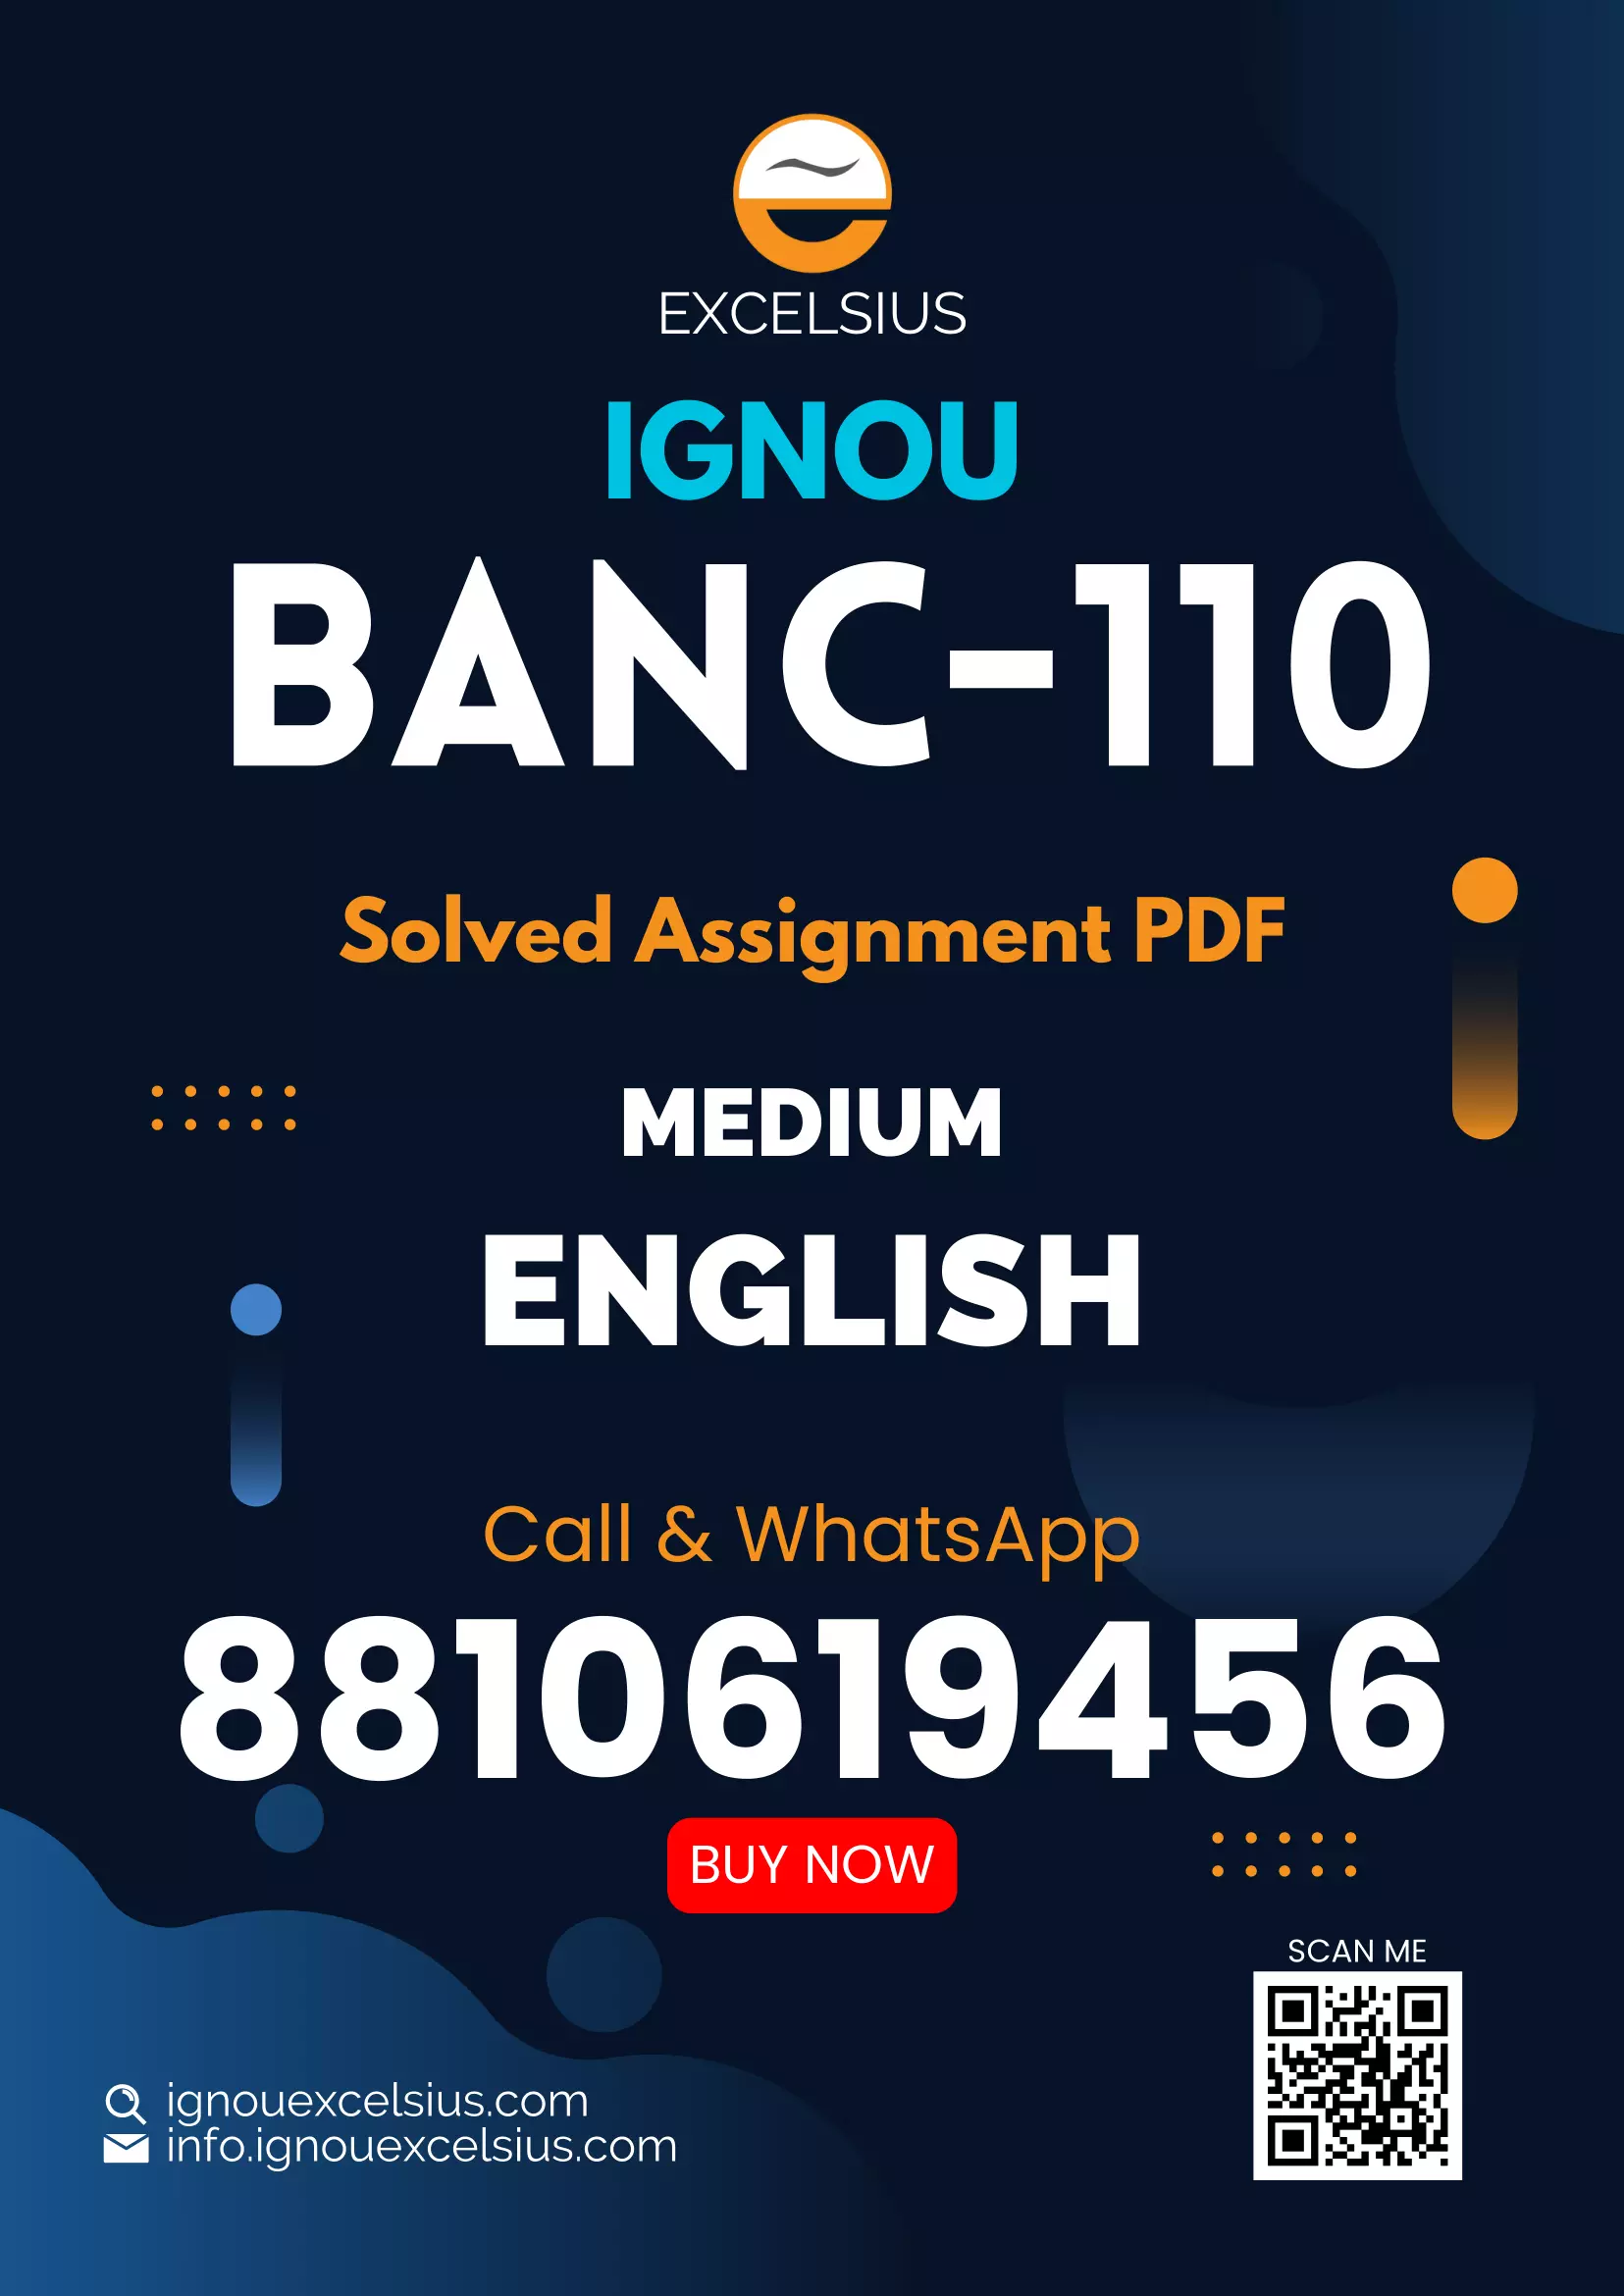 IGNOU BANC-110 - Research Methods, Latest Solved Assignment-July 2022 – January 2023